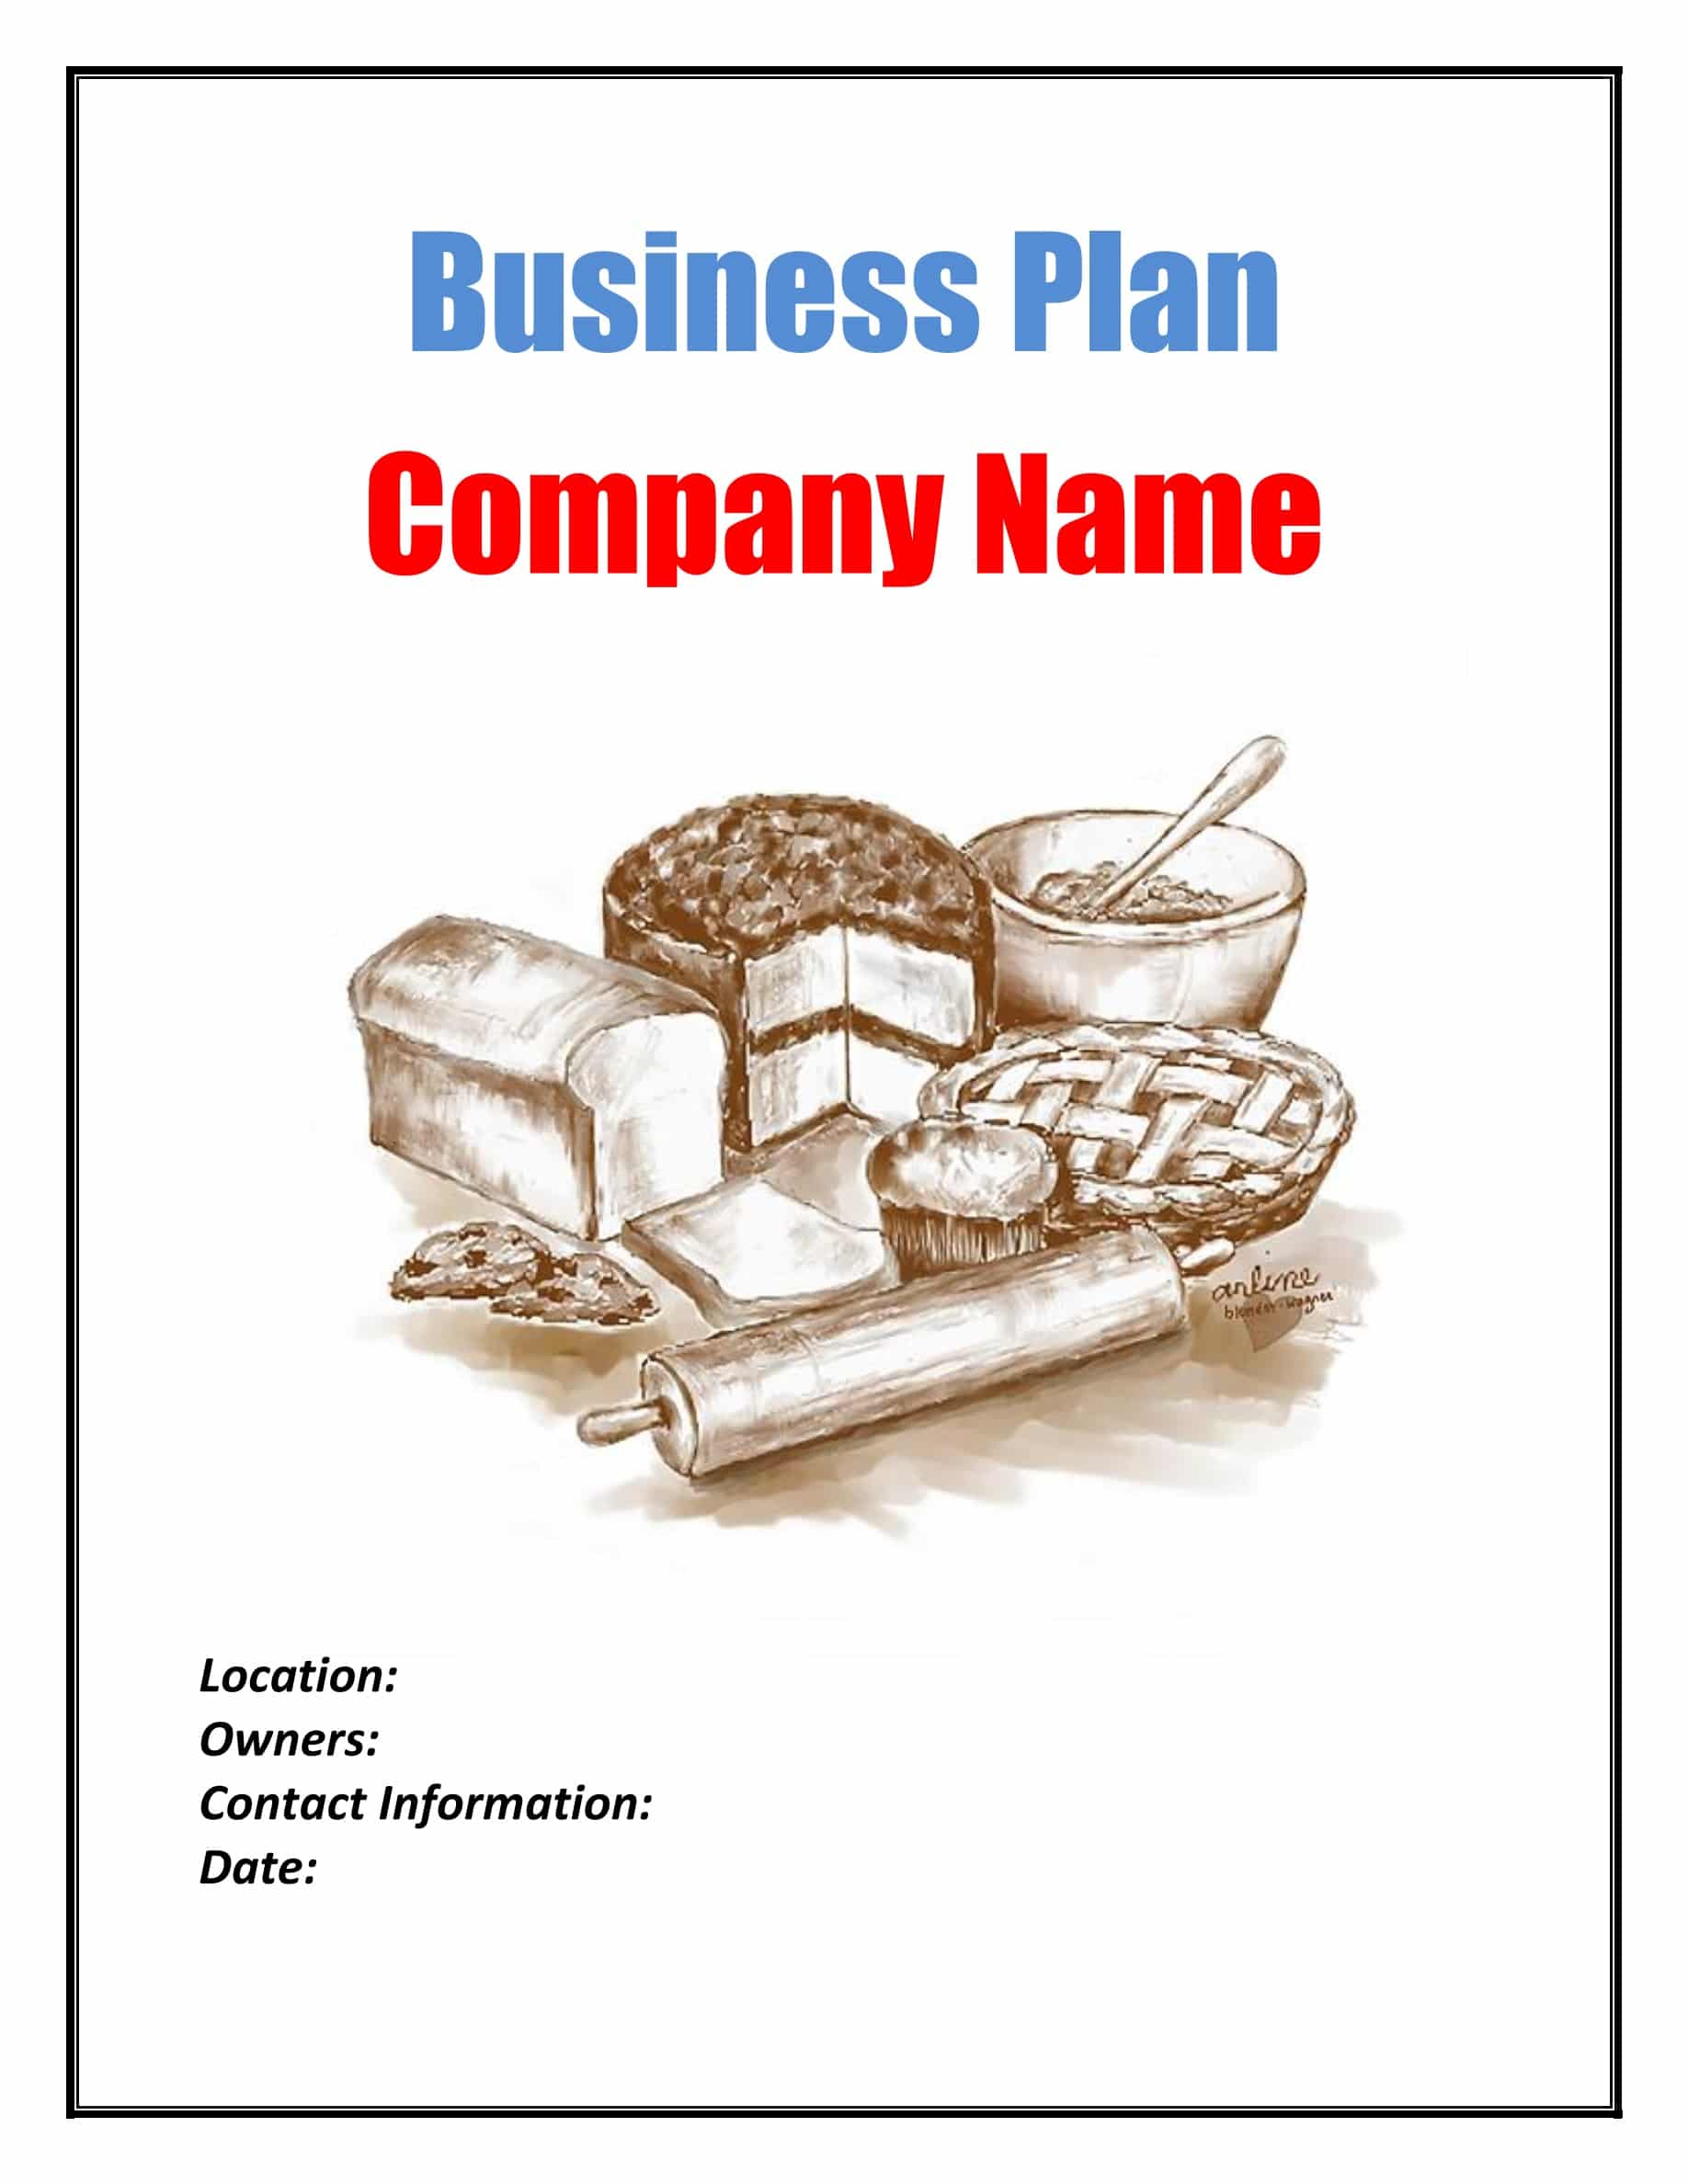 business plan for bakery and coffee shop